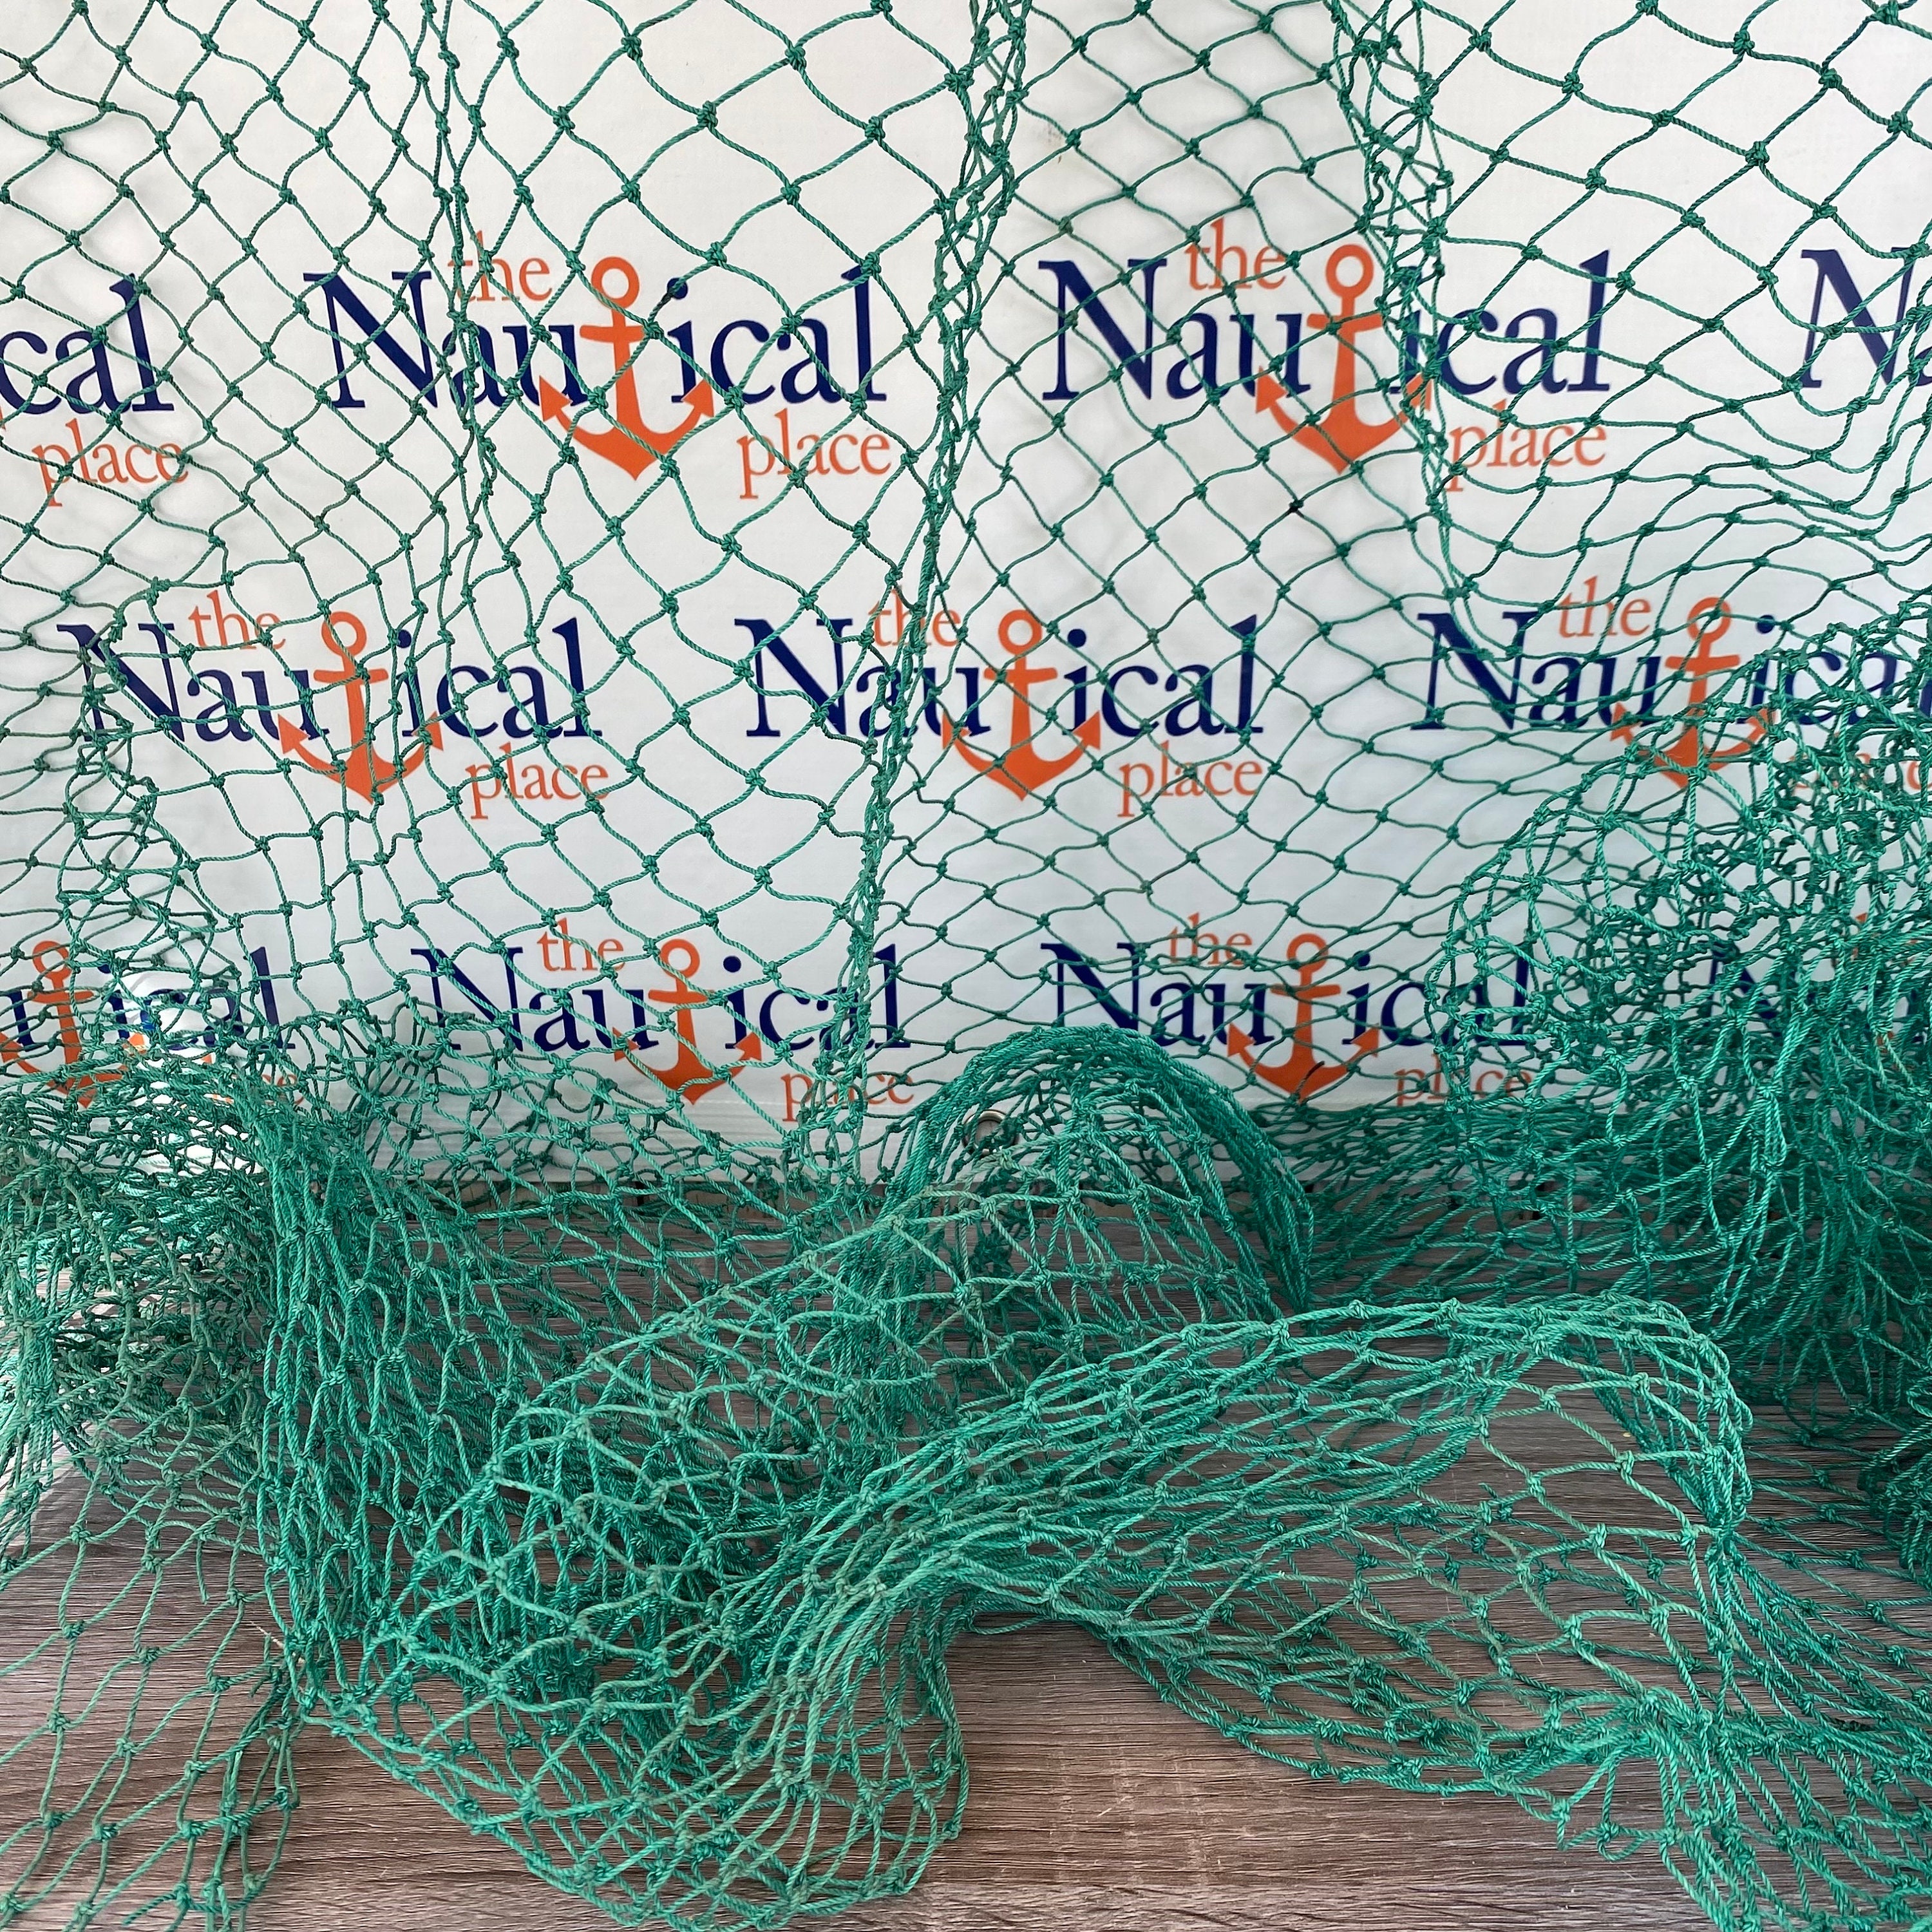 Decorative Green Fish Net - 5 ft x 8 ft Knotted - New Commercial Fish  Netting - Nautical Decor - Backdrop Photo Shoot